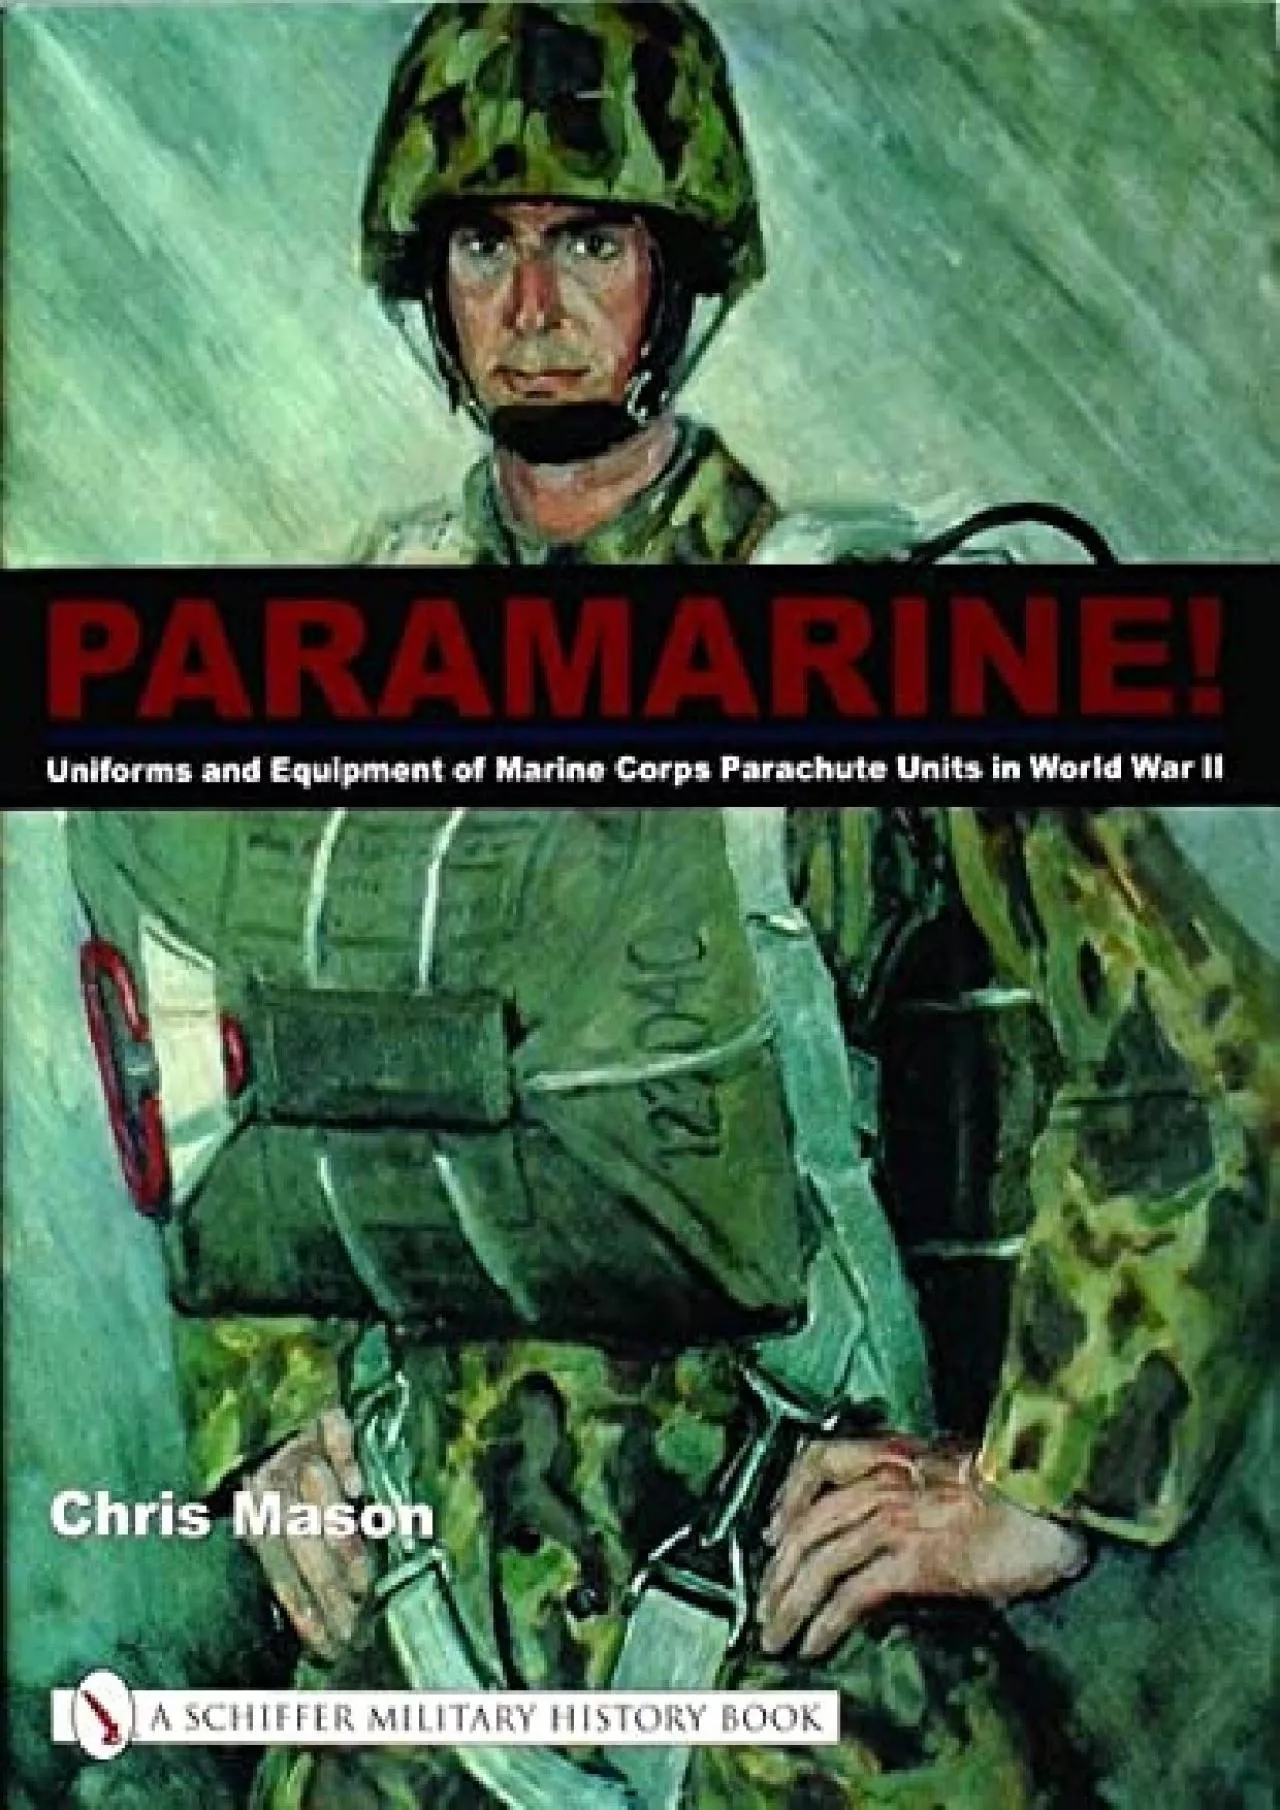 [DOWNLOAD]-Paramarine!: Uniforms and Equipment of Marine Corps Parachute Units in World